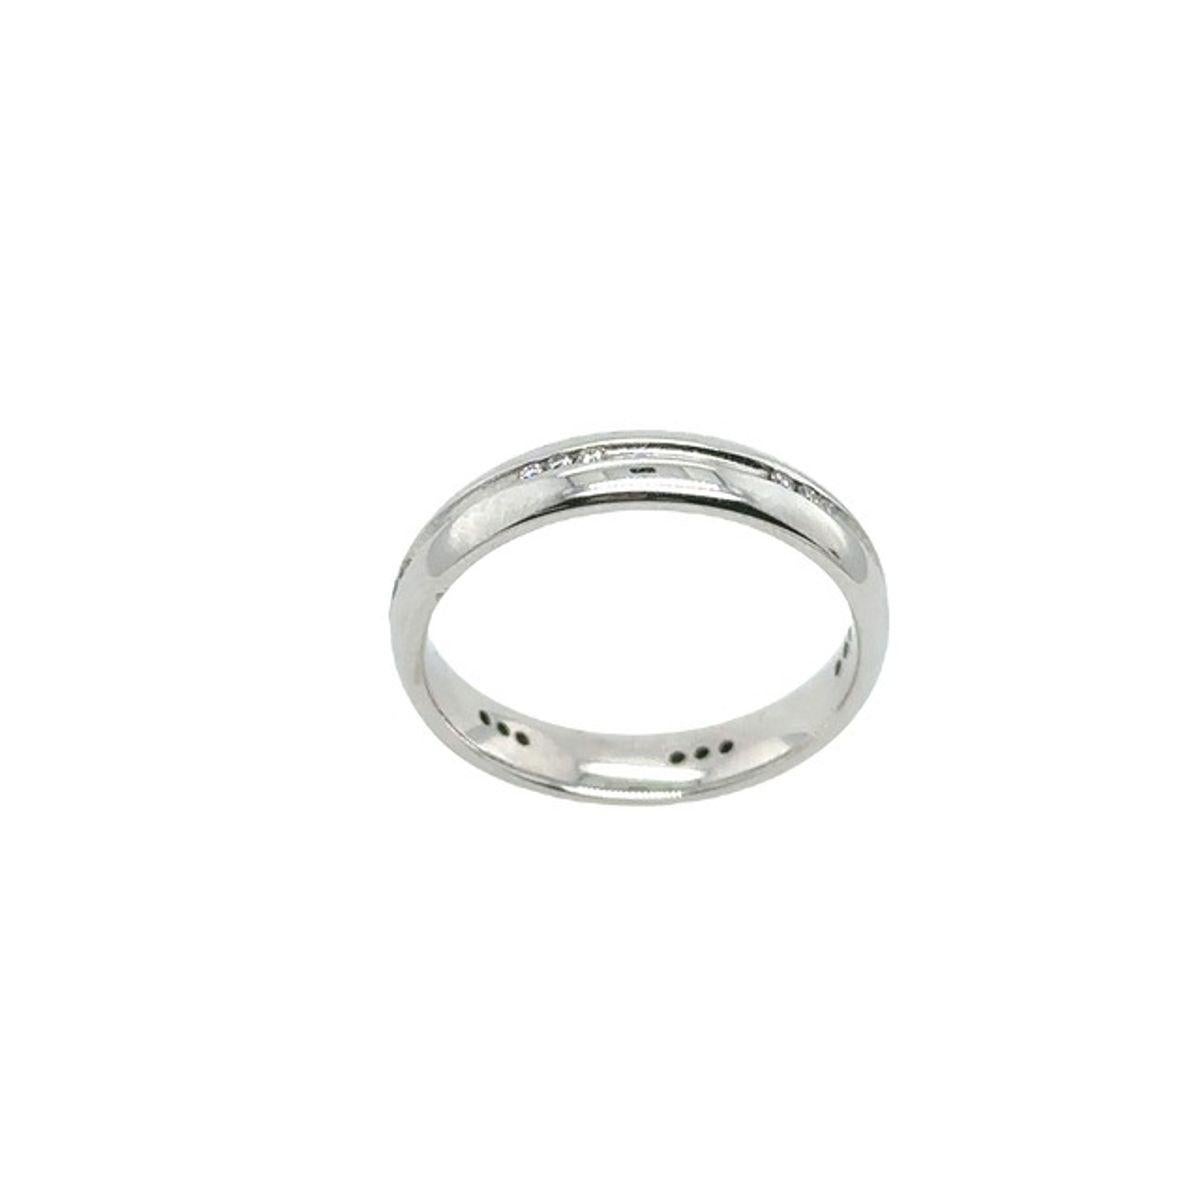 Classic 4mm Court Shape Wedding Band, Set With 18 Round Diamonds,0.07ct

This 4mm court shape wedding band is set with 18 round diamonds weighing 0.07ct in 18ct white gold. It is a classic wedding band to symbolize an everlasting love. The grooved